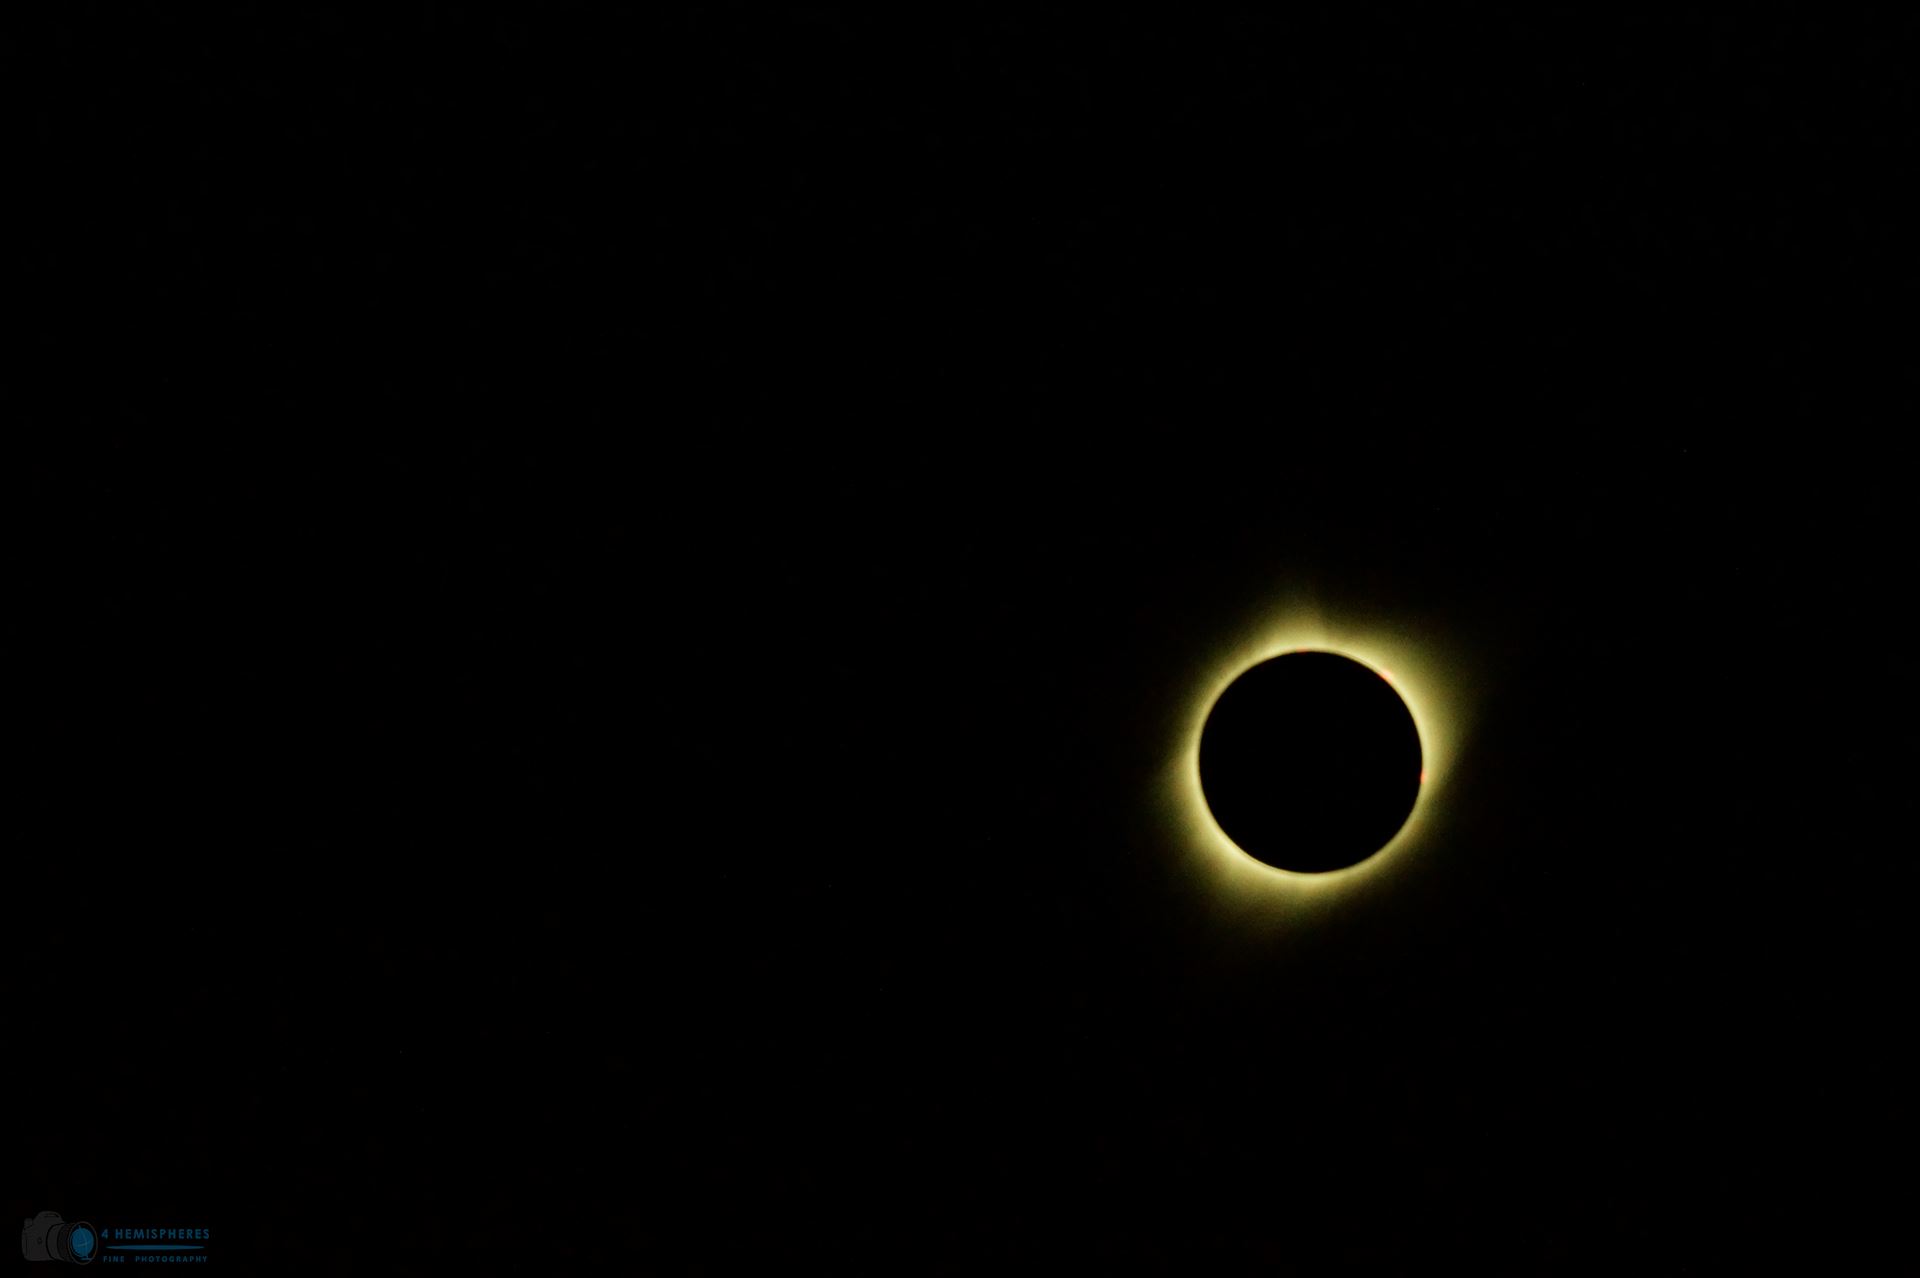 Corona 1 - The solar corona is only visible during totality which today lasted almost 2 minutes.  by 4 Hemispheres Photography